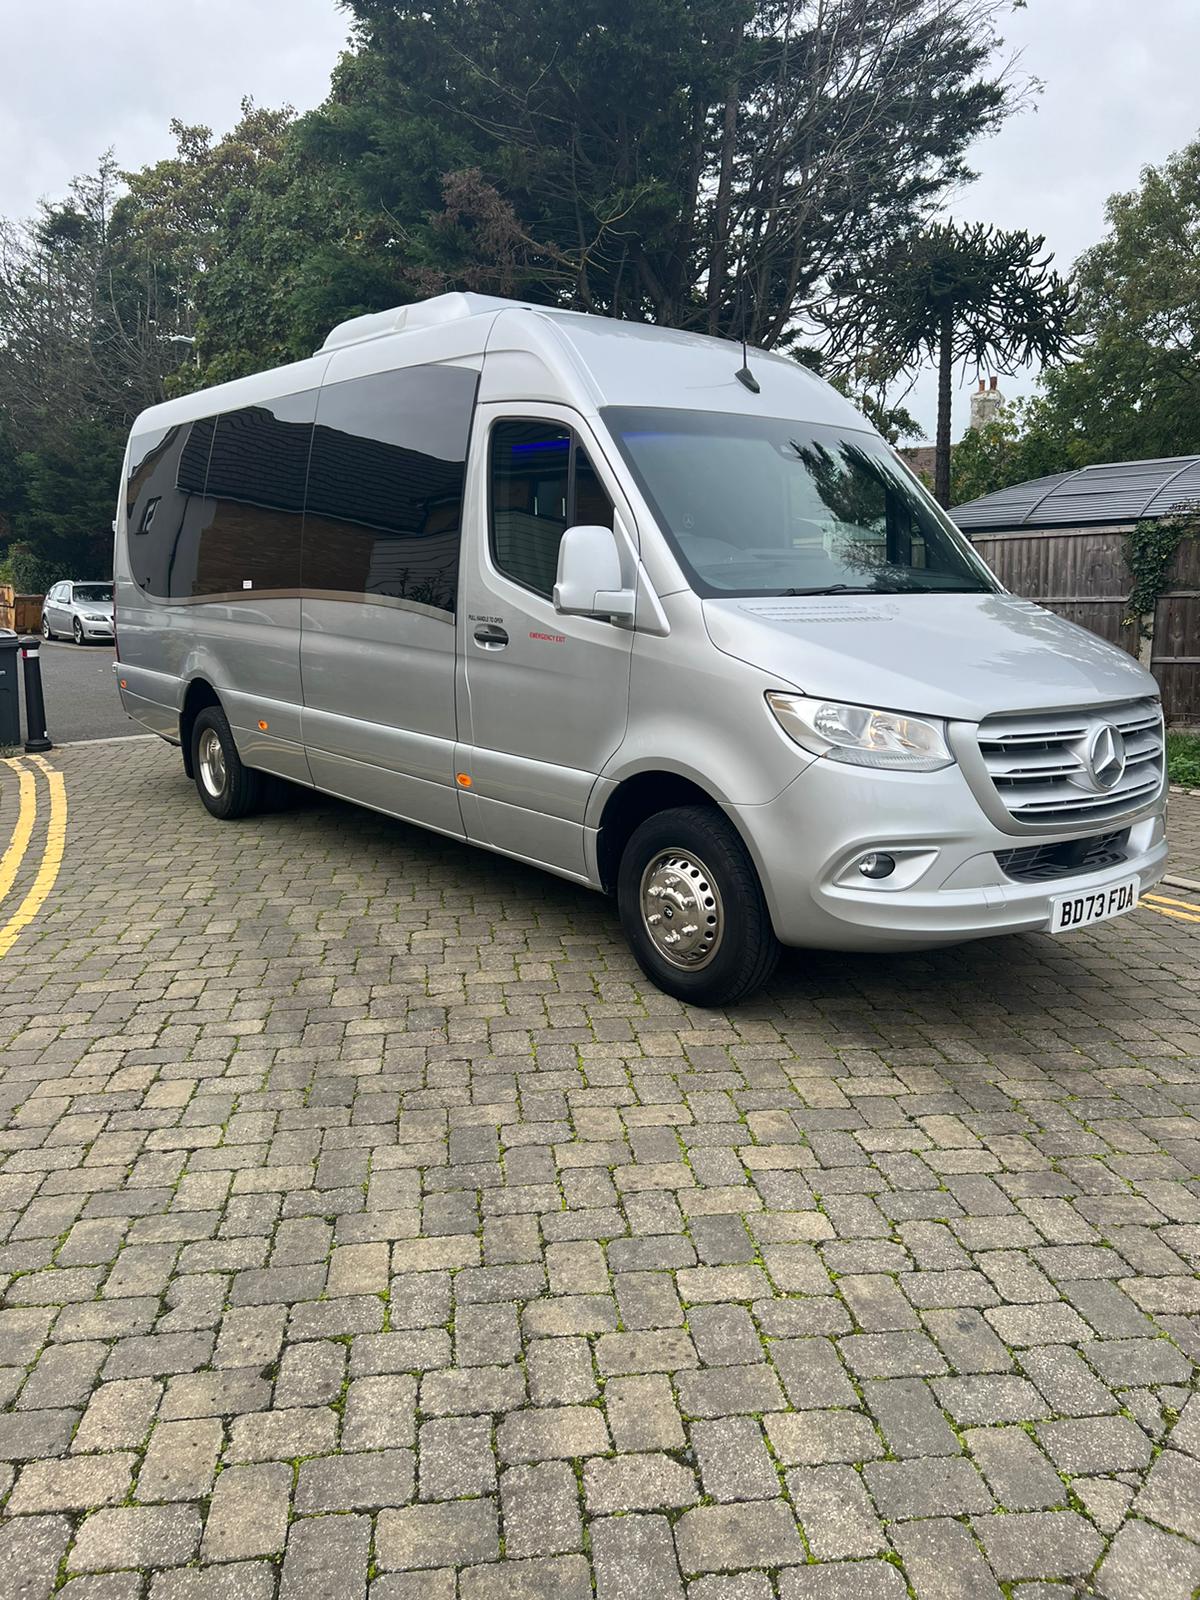 Maximising Comfort on Long Journeys: Tips for Hiring a 16 Seater Minibus